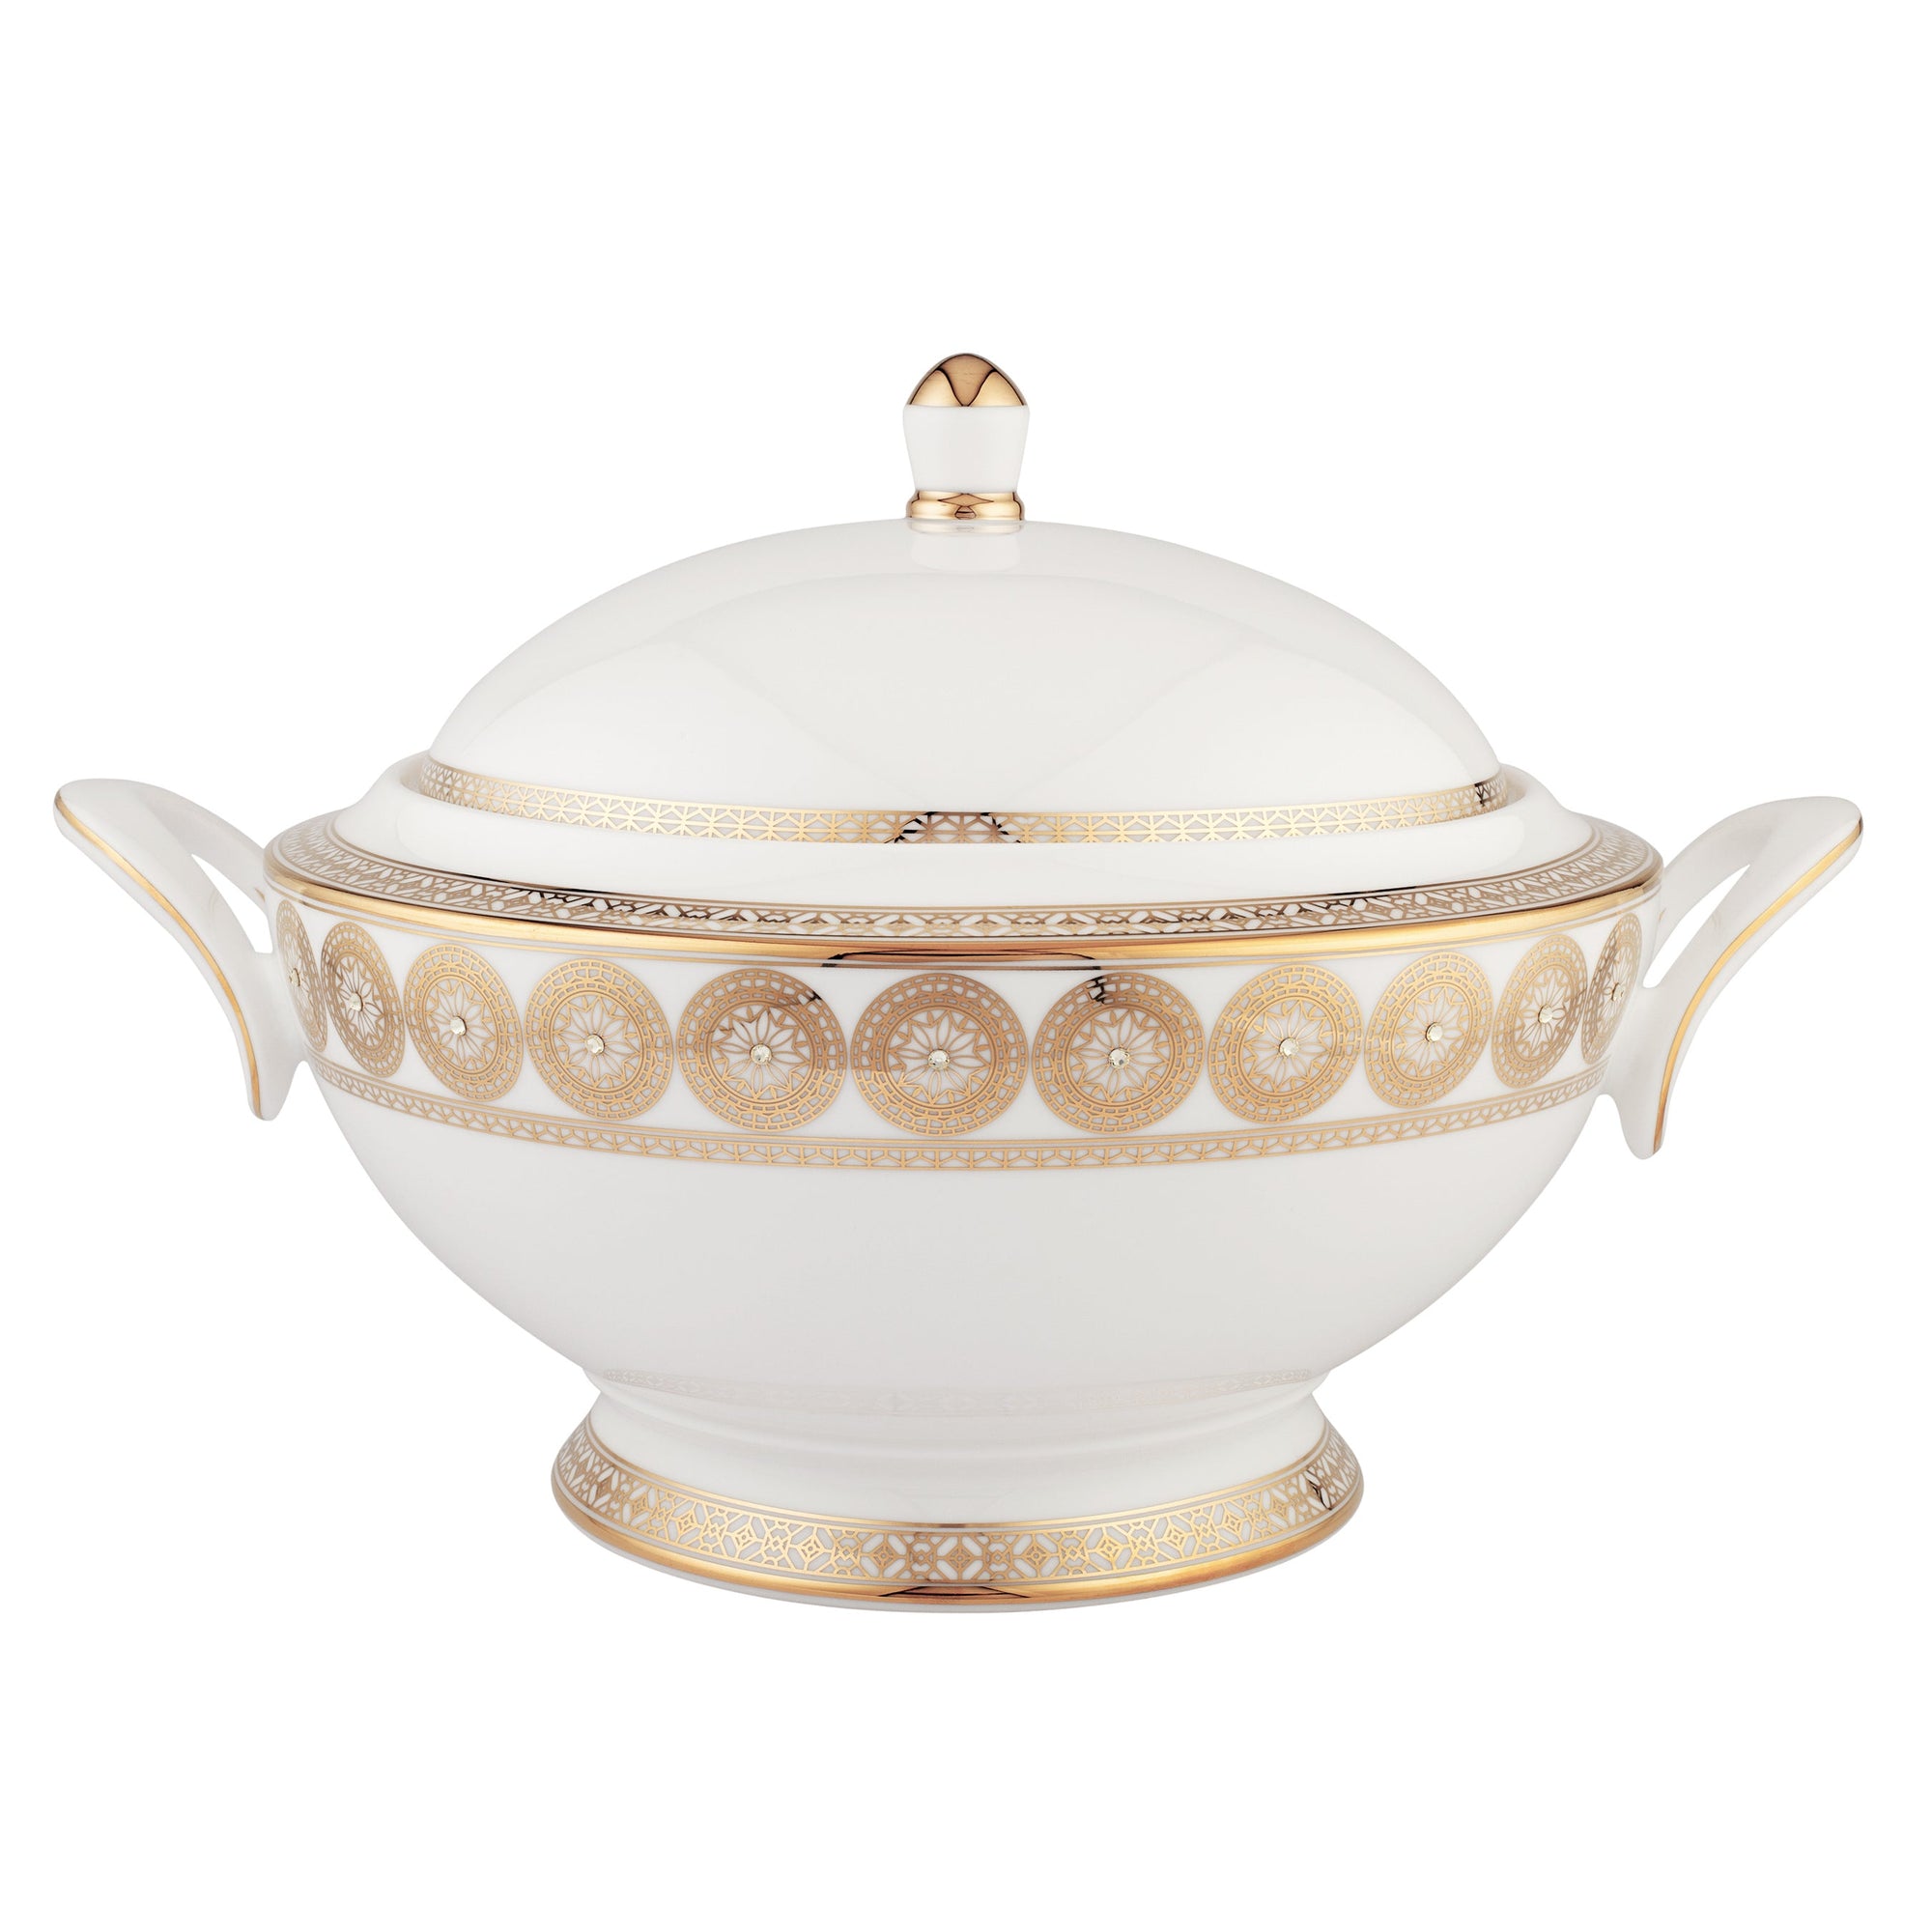 Prouna Golden Leaves Covered Vegetable Bowl / Soup Tureen White Background Photo